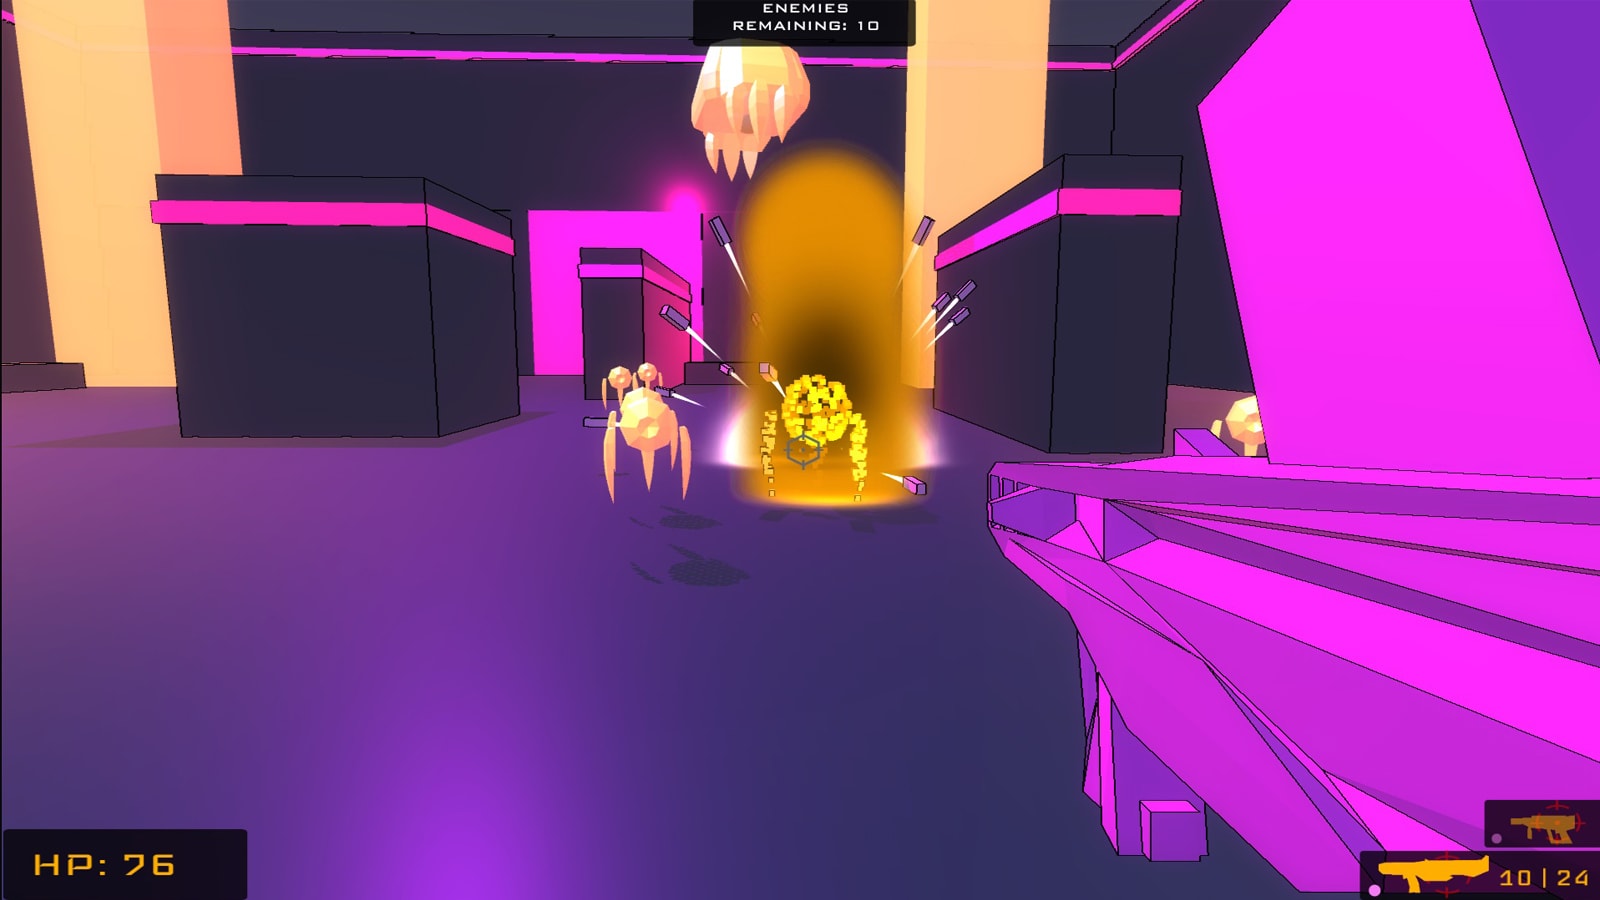 The player shoots a purple burst at an anti-virus, disintegrating it into small particles. 